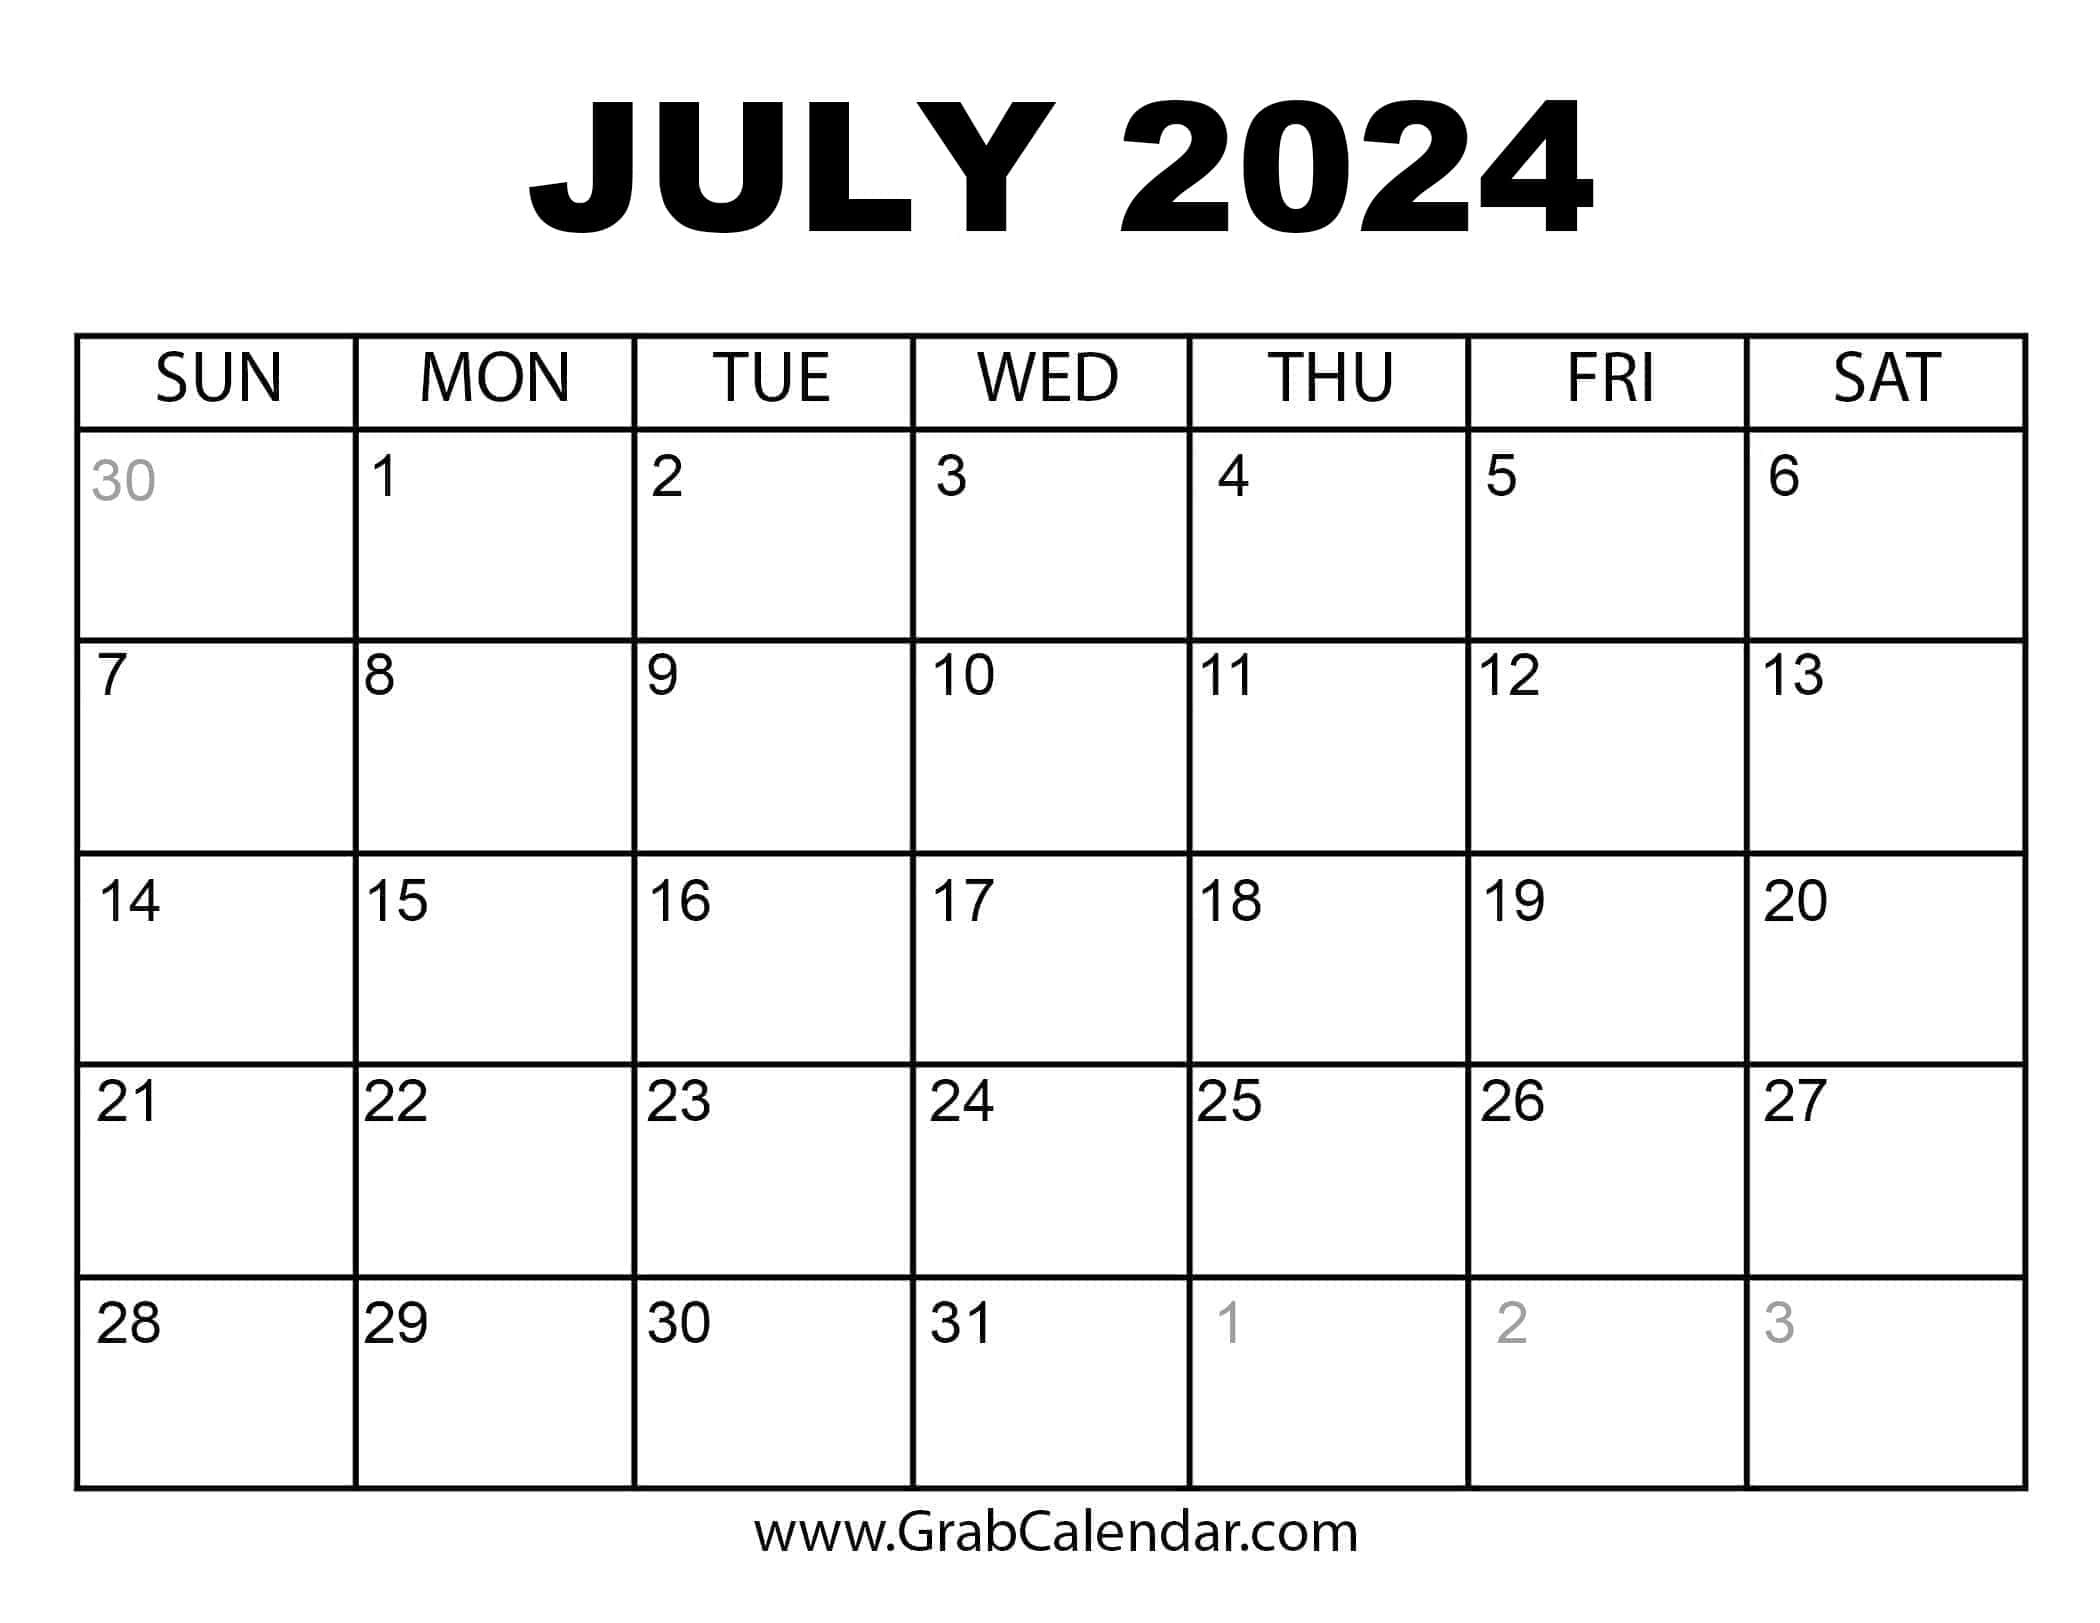 Printable July 2024 Calendar pertaining to Calendar Month of July 2024